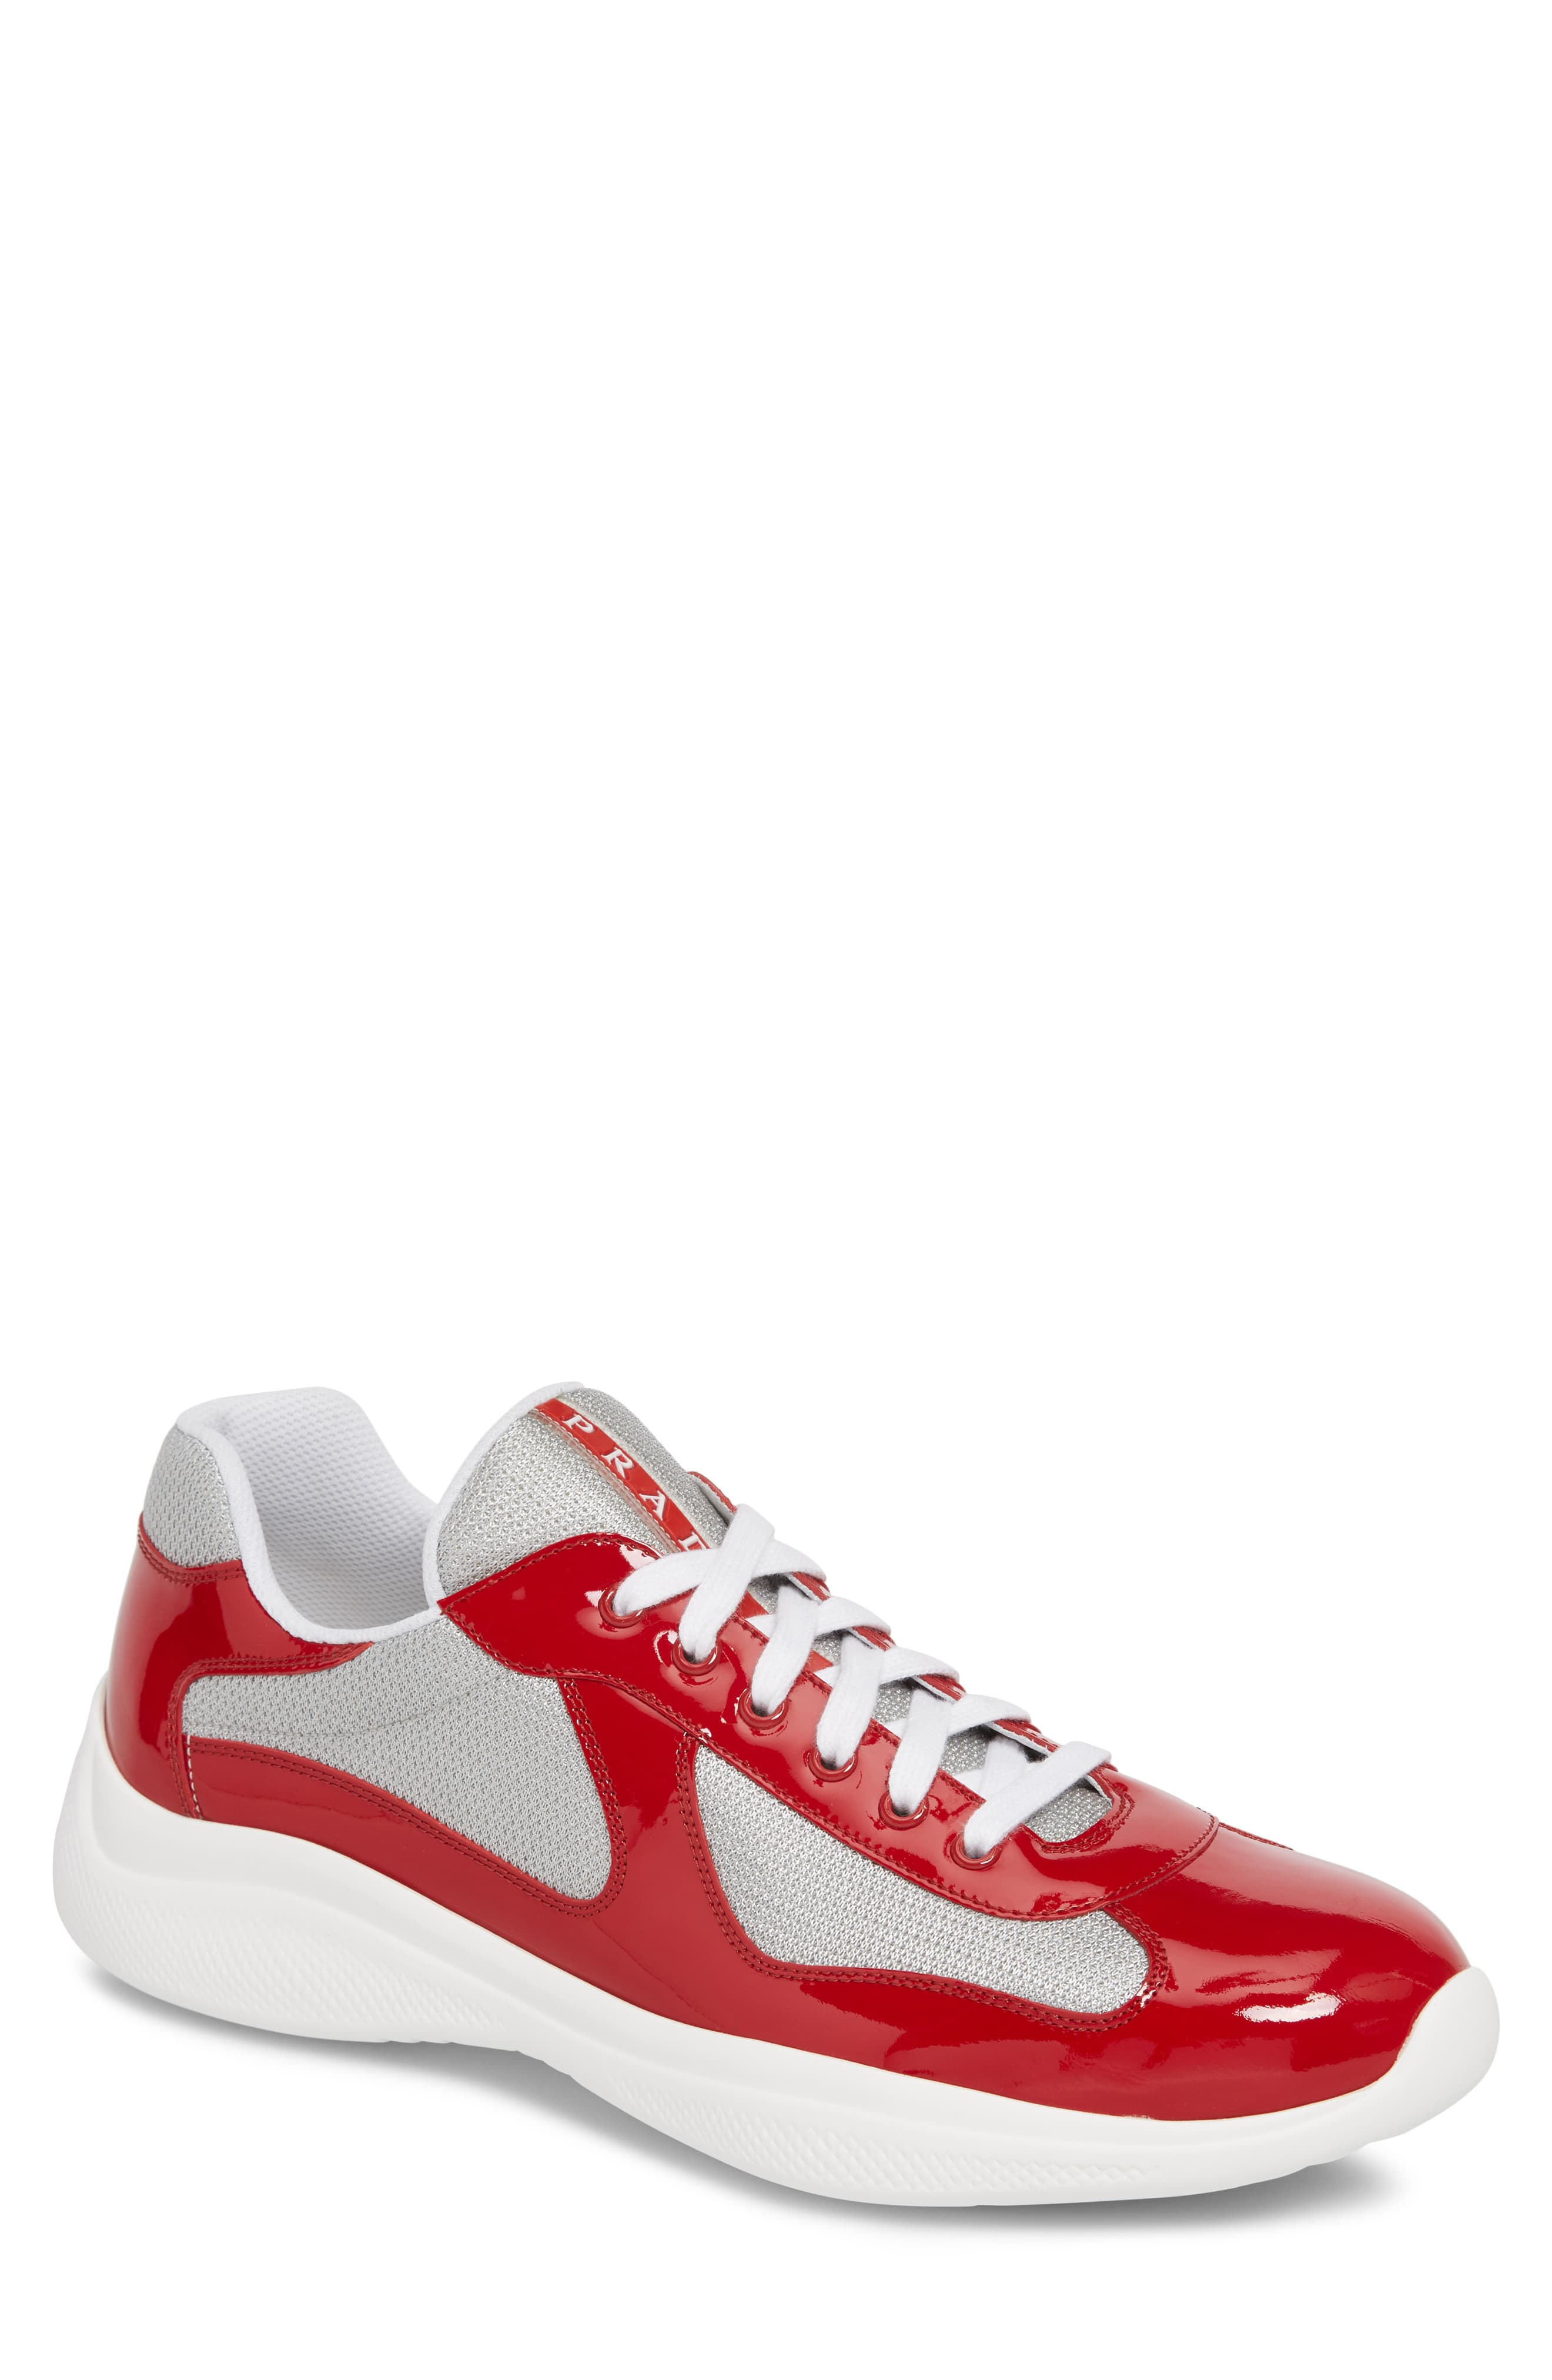 red patent leather prada sneakers, OFF 